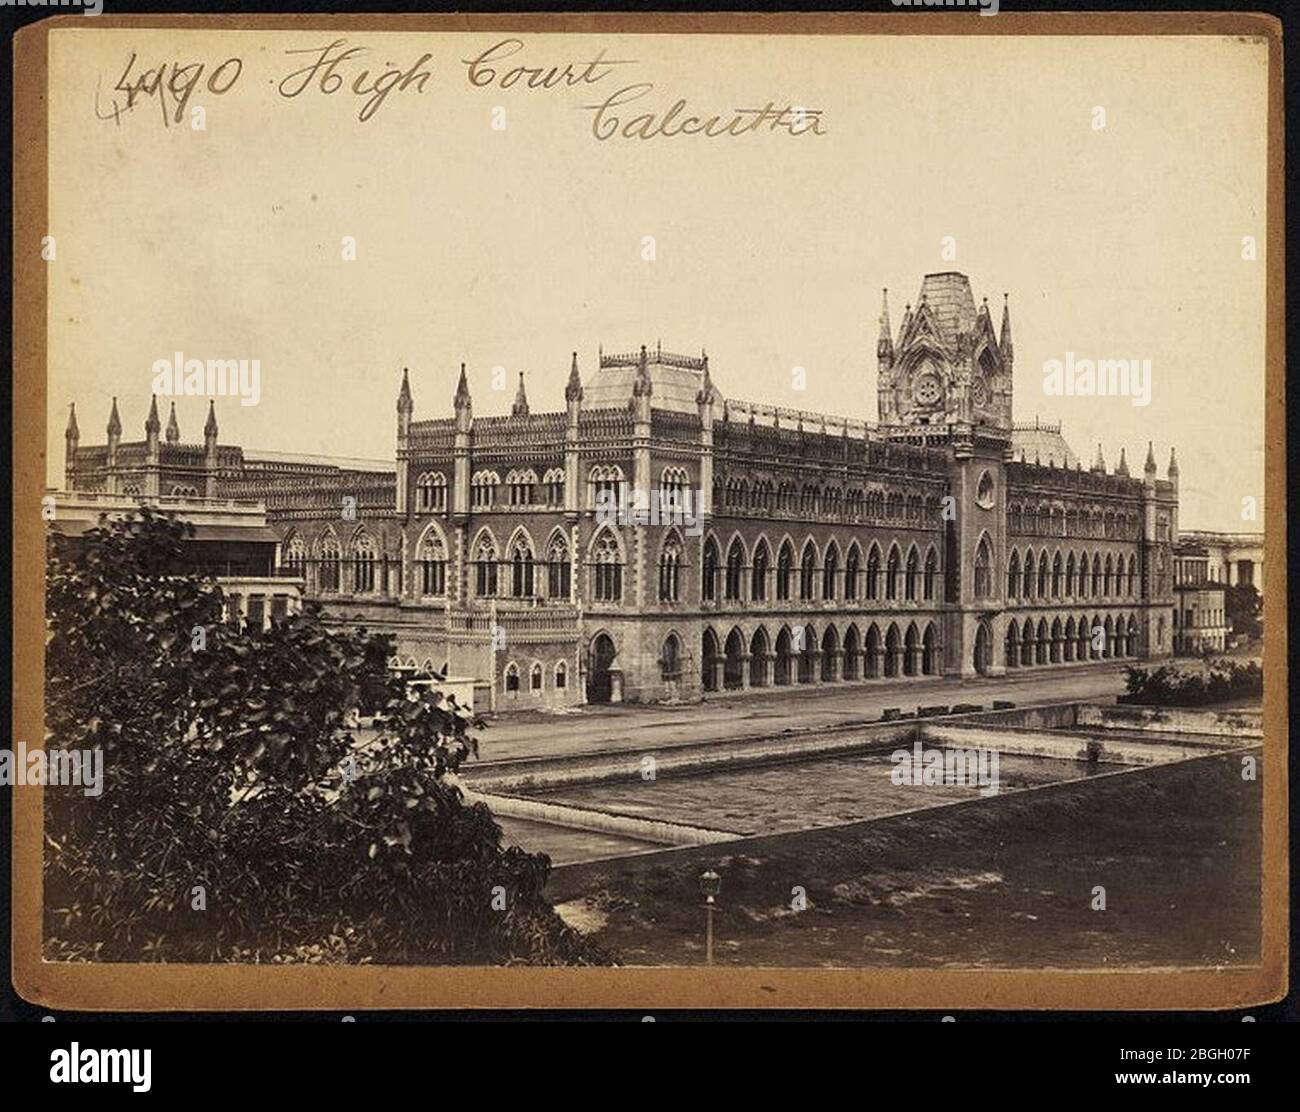 High Court of Calcutta (Third view) by Francis Frith. Stock Photo